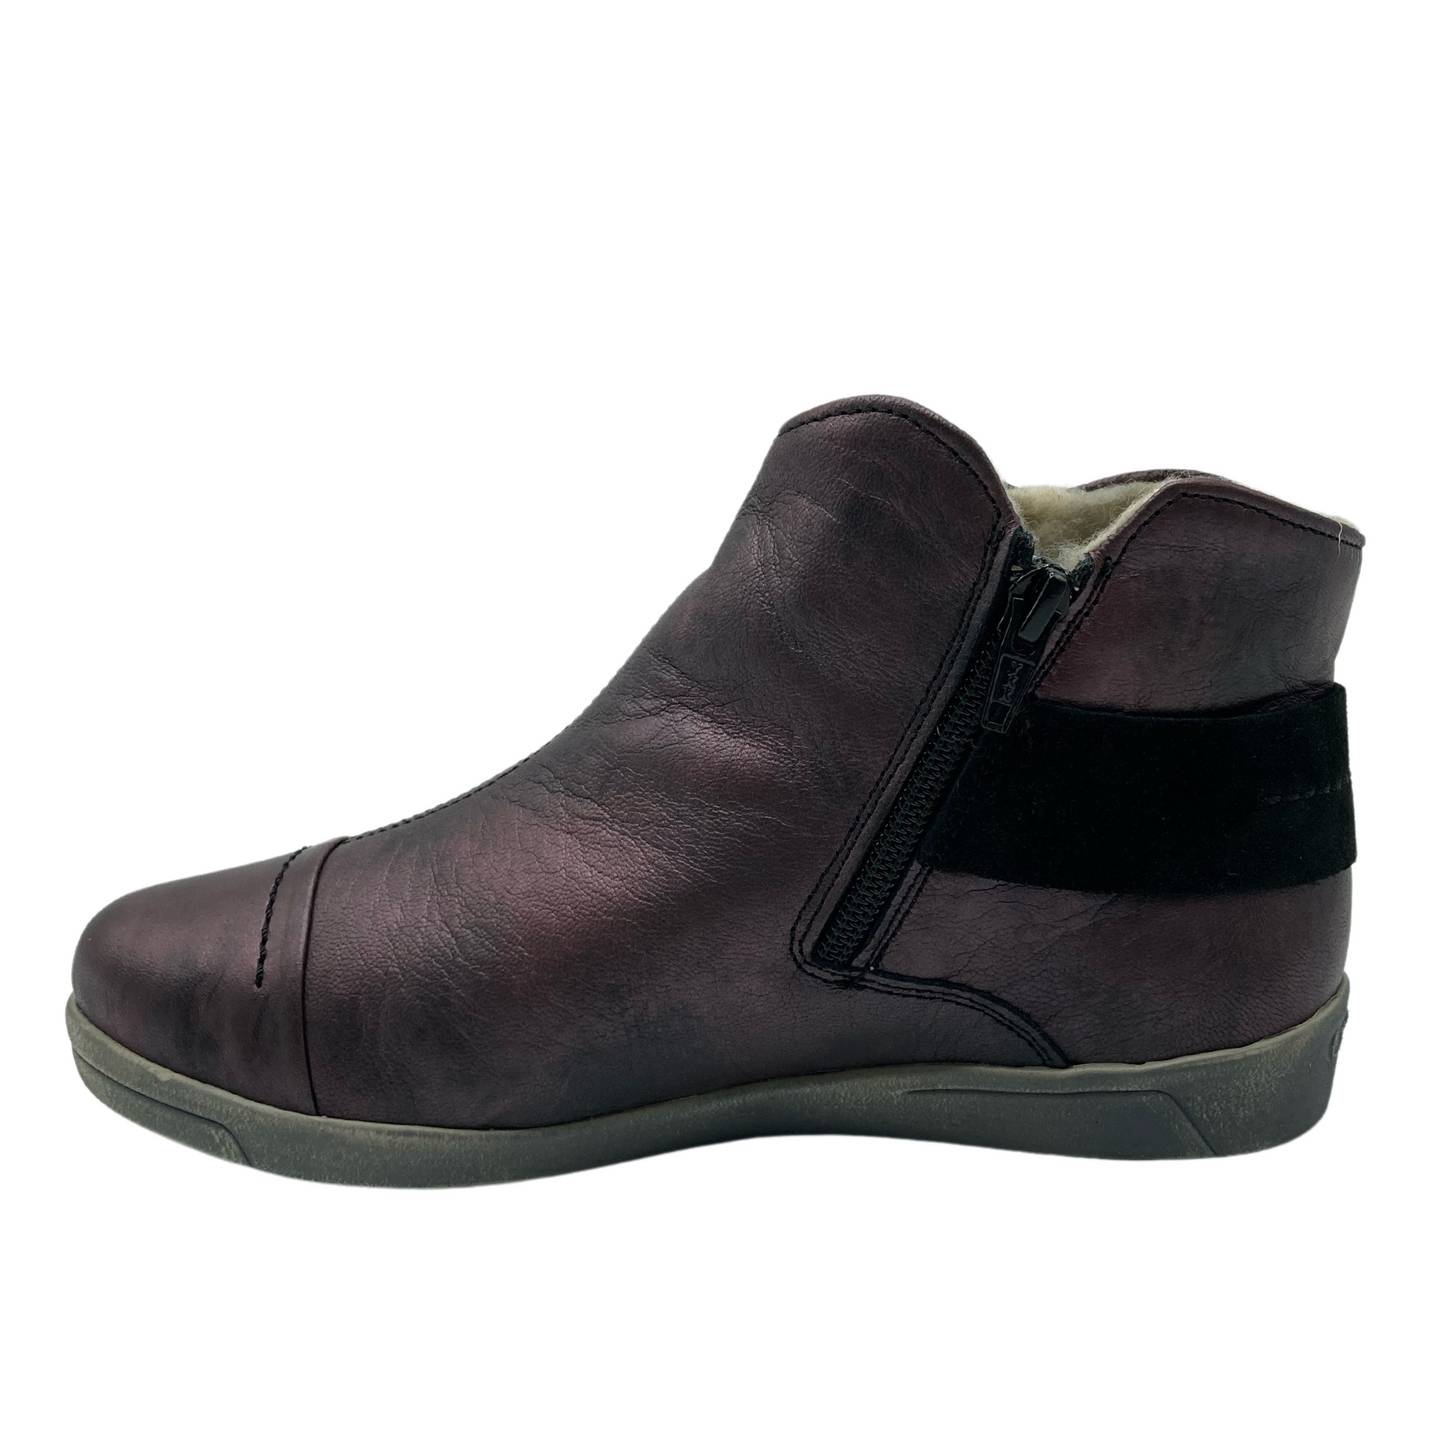 Left facing view of leather short boot with wrap around strap, grey rubber outsole and side zipper closure